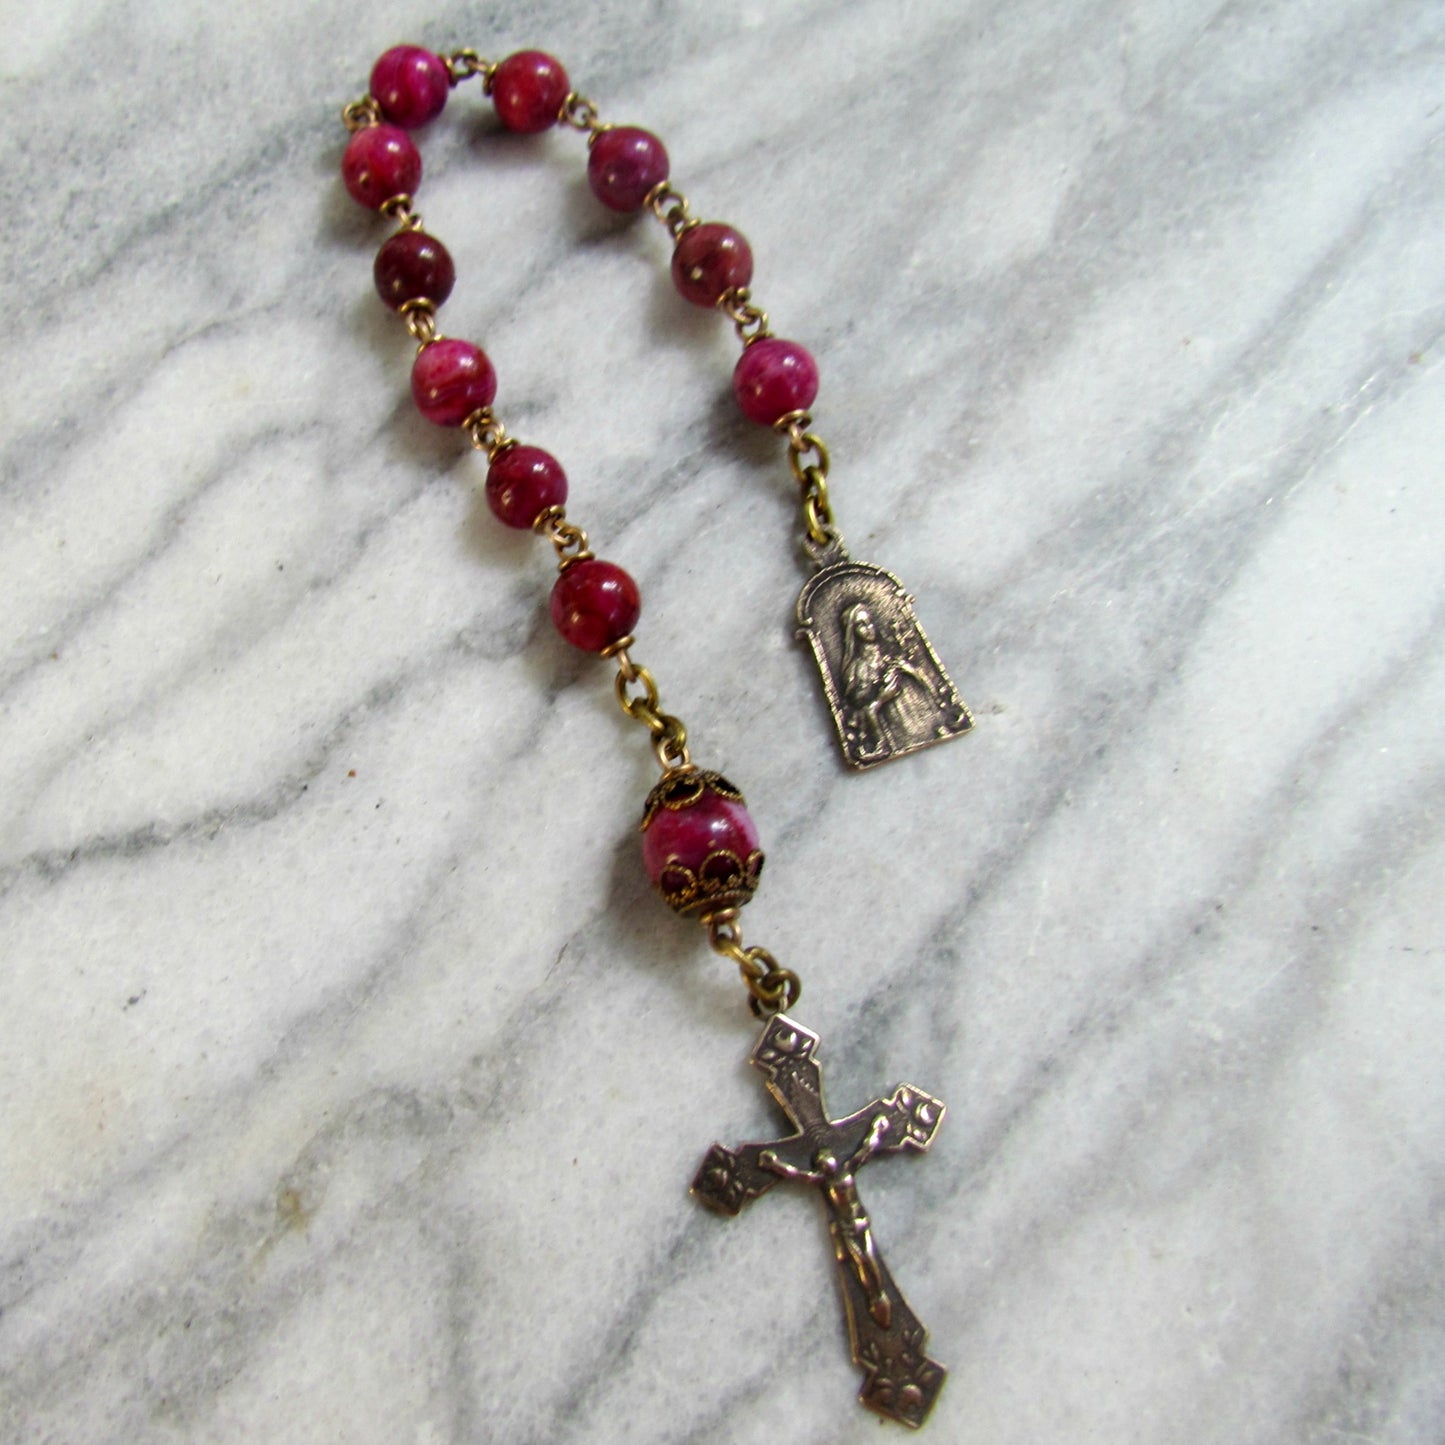 Tenner, Catholic Rosary, St Therese medal